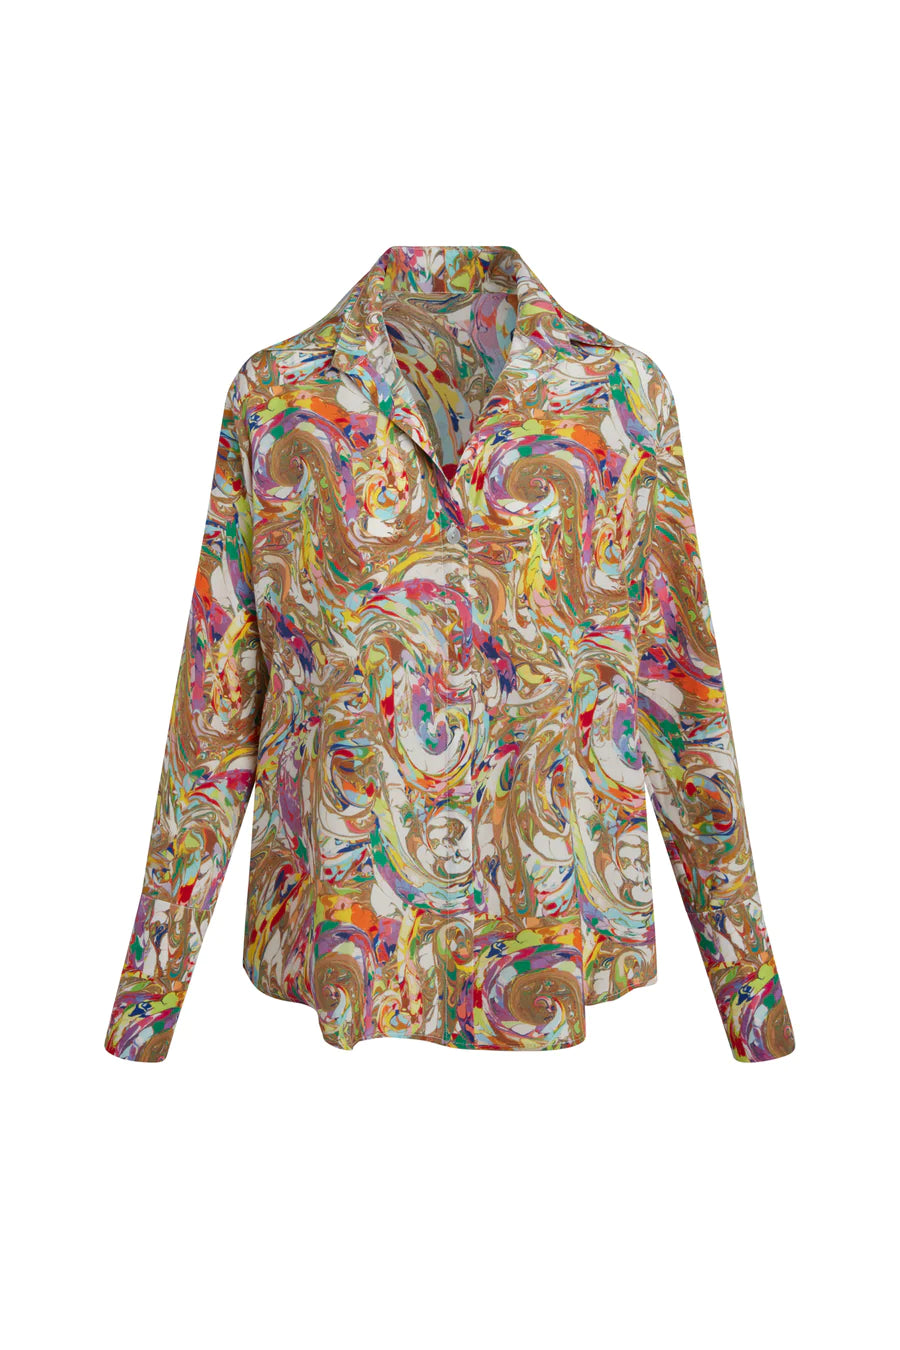 Daria French Cuff Silk Blouse - Paint Swirl by Catherine Gee